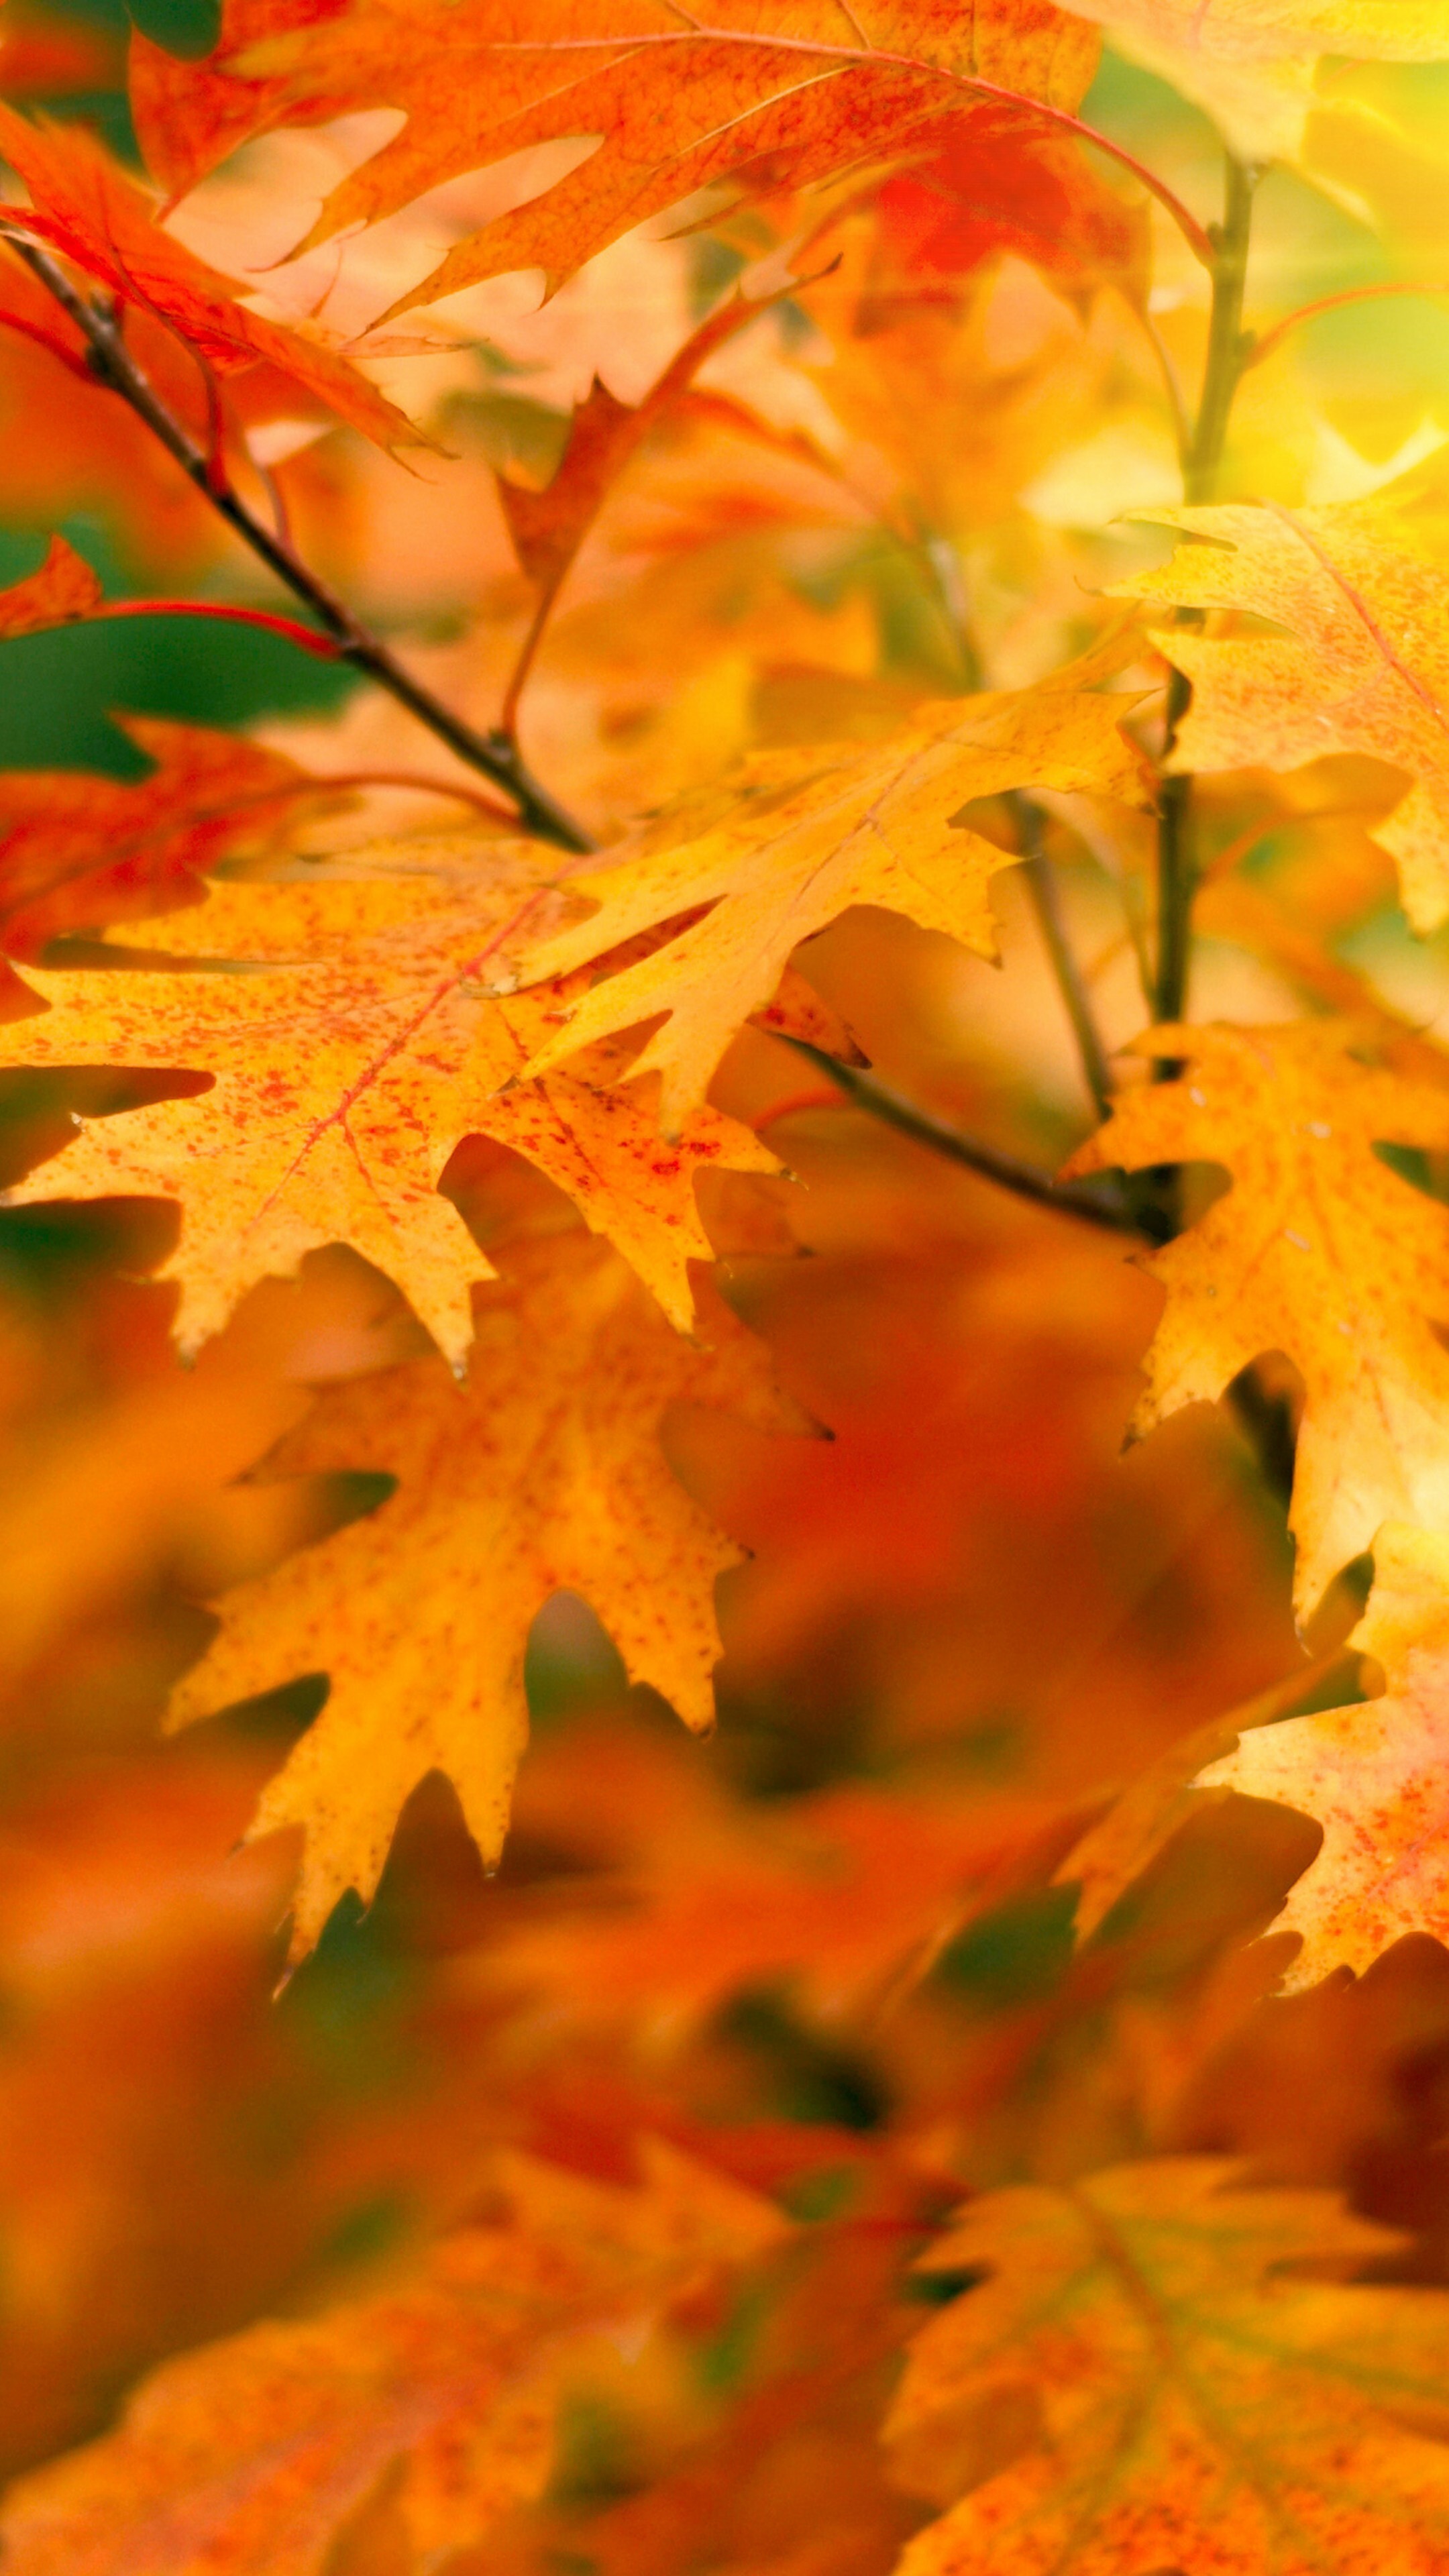 Gold Leaf: Red oak leaves with pointed tips, Quercus rubra, Tree branch, Apricot-orange foliage. 2160x3840 4K Wallpaper.